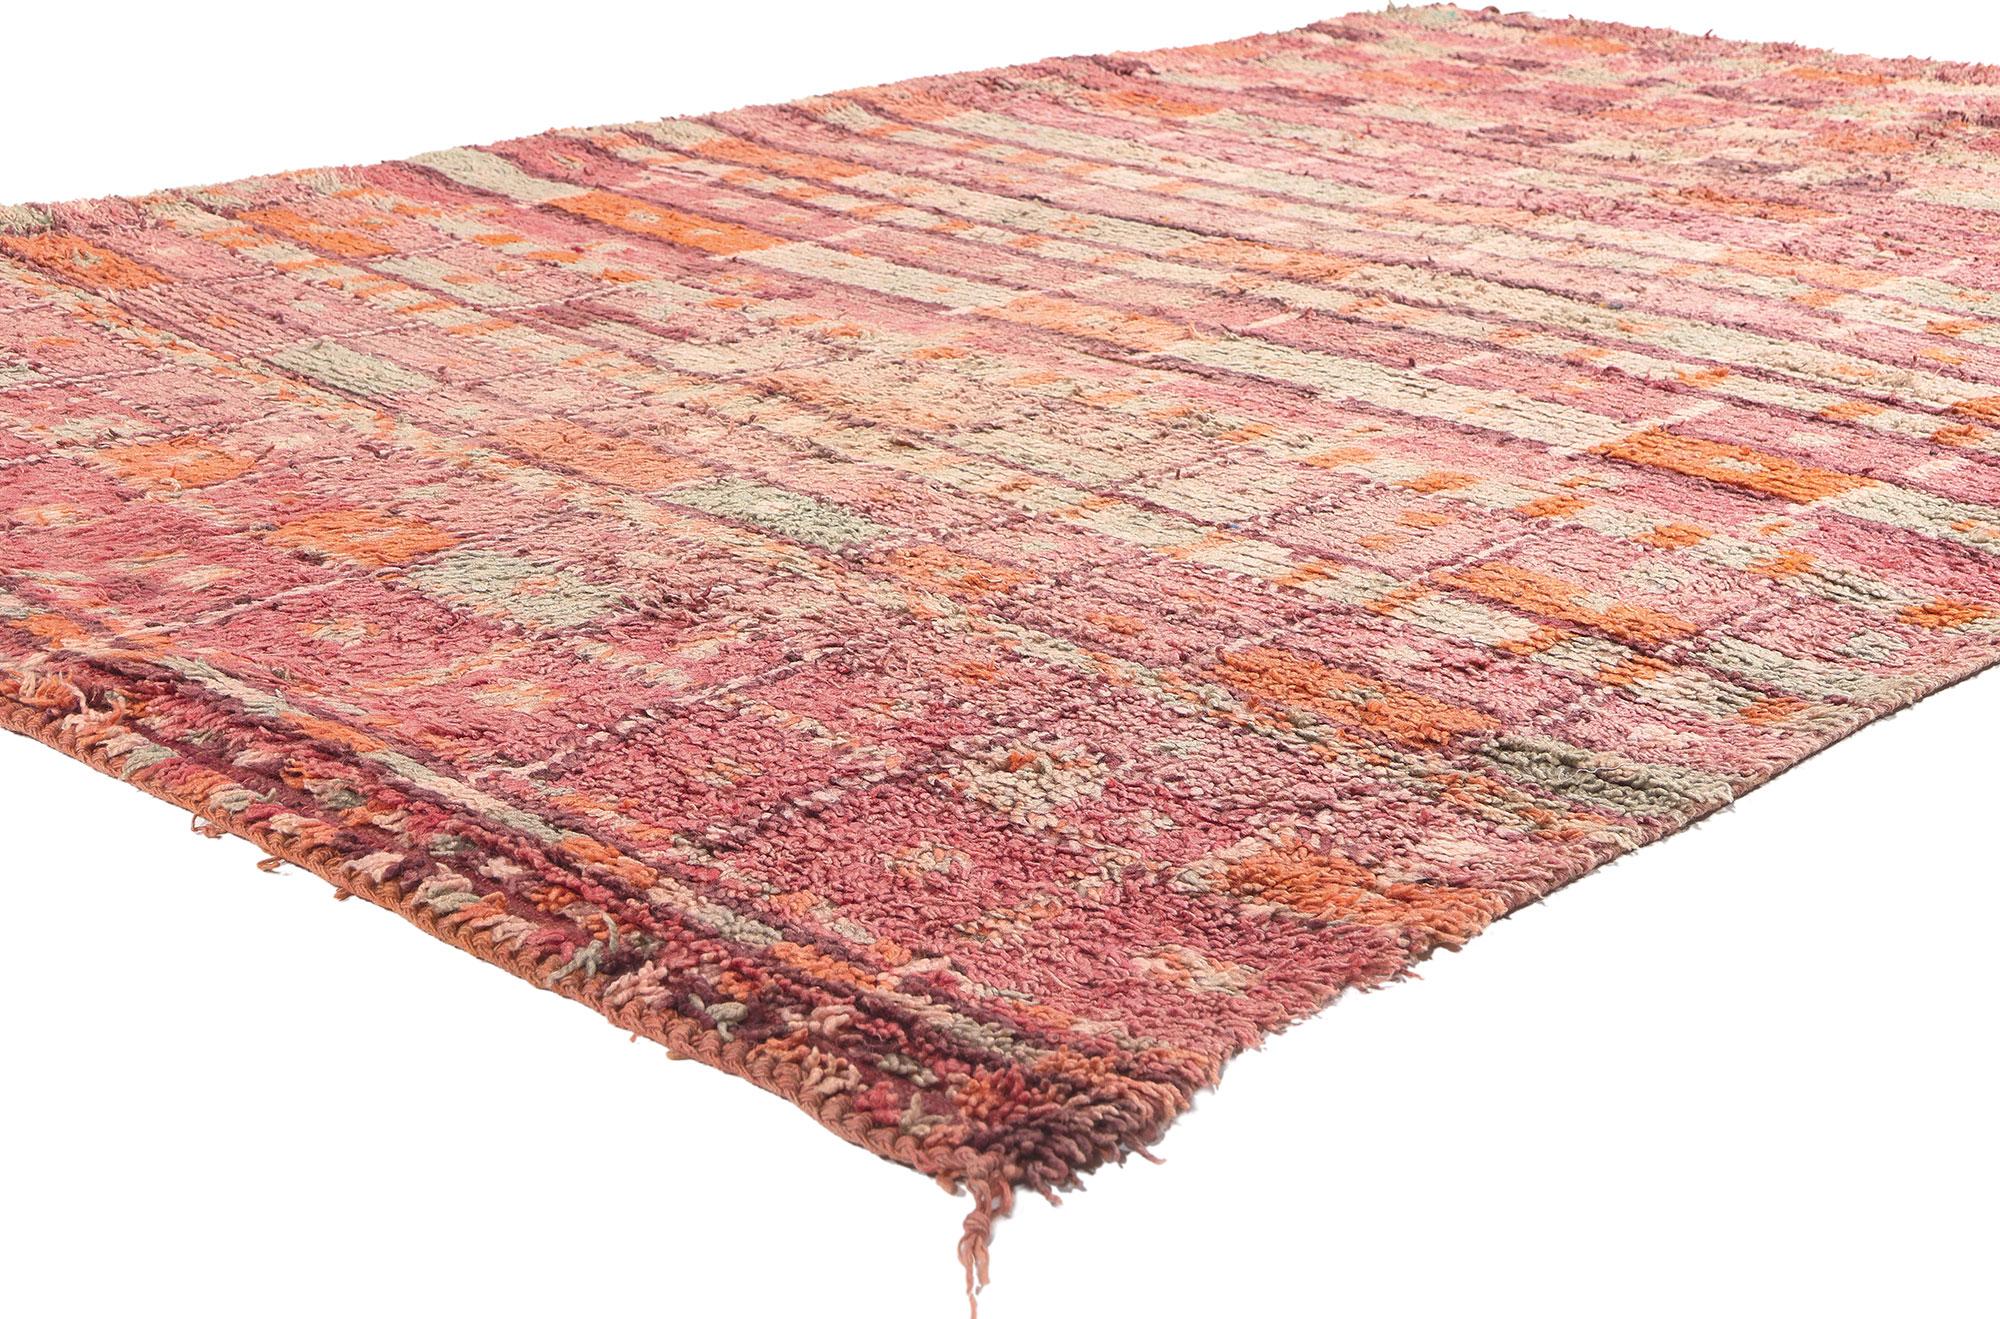 20366 Vintage Rehamna Moroccan Rug, 05'11 x 09'00. 
Experience the fusion of Cubist flair and Southwest boho chic in this meticulously hand-knotted wool vintage Rehamna Moroccan rug. The checkerboard design and an array of pastel hues woven into the